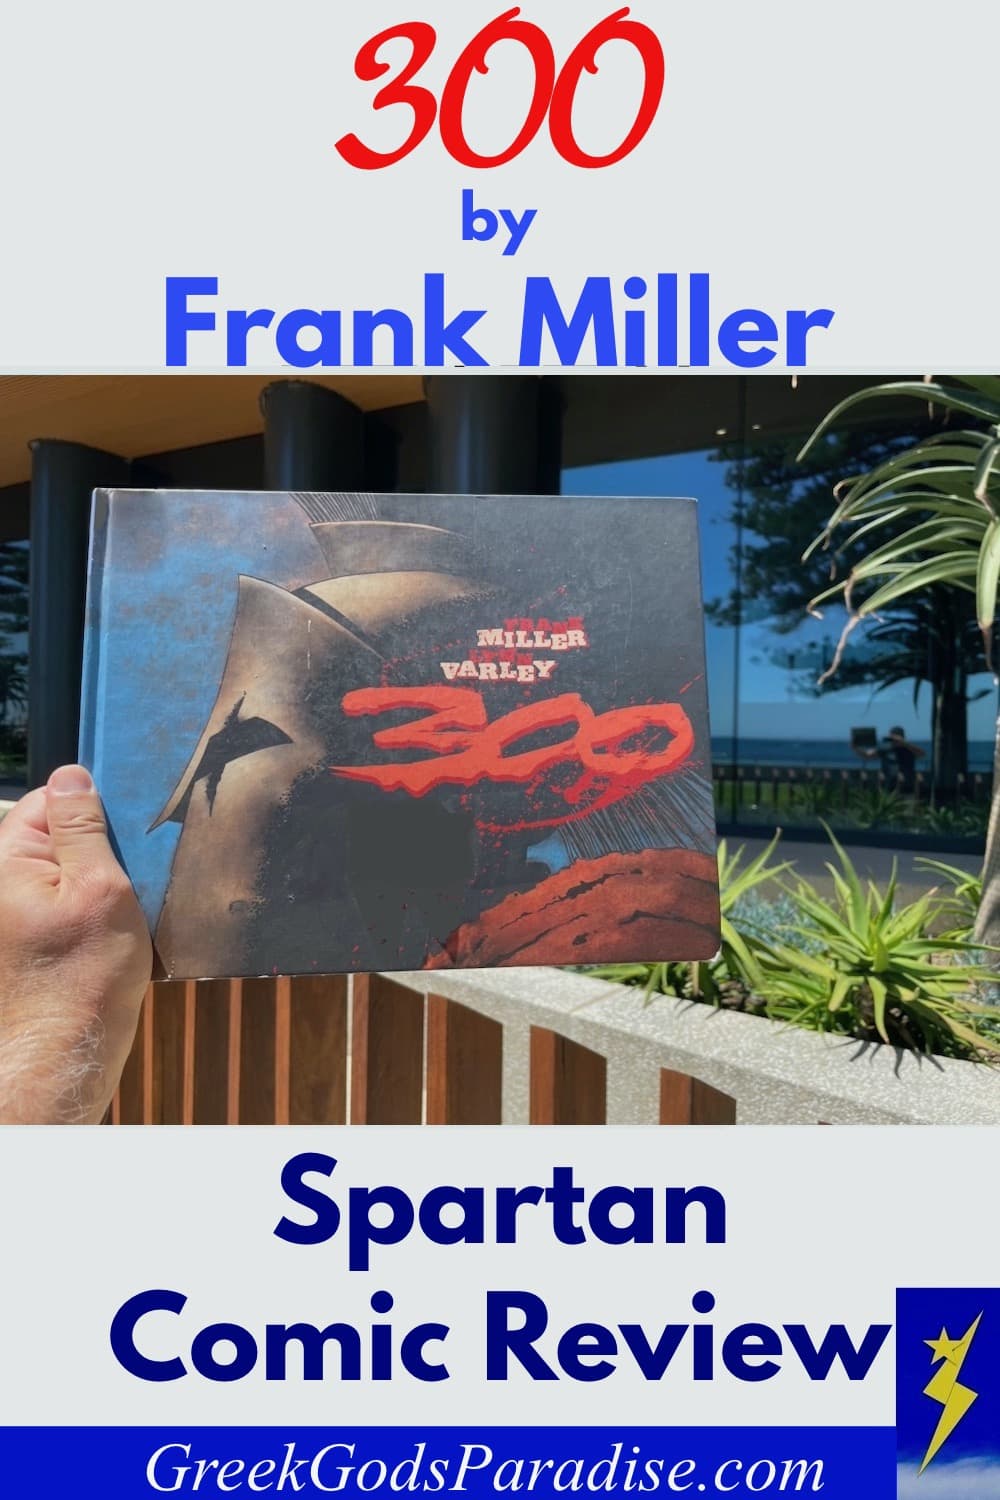 300 by Frank Miller Spartan Comic Review